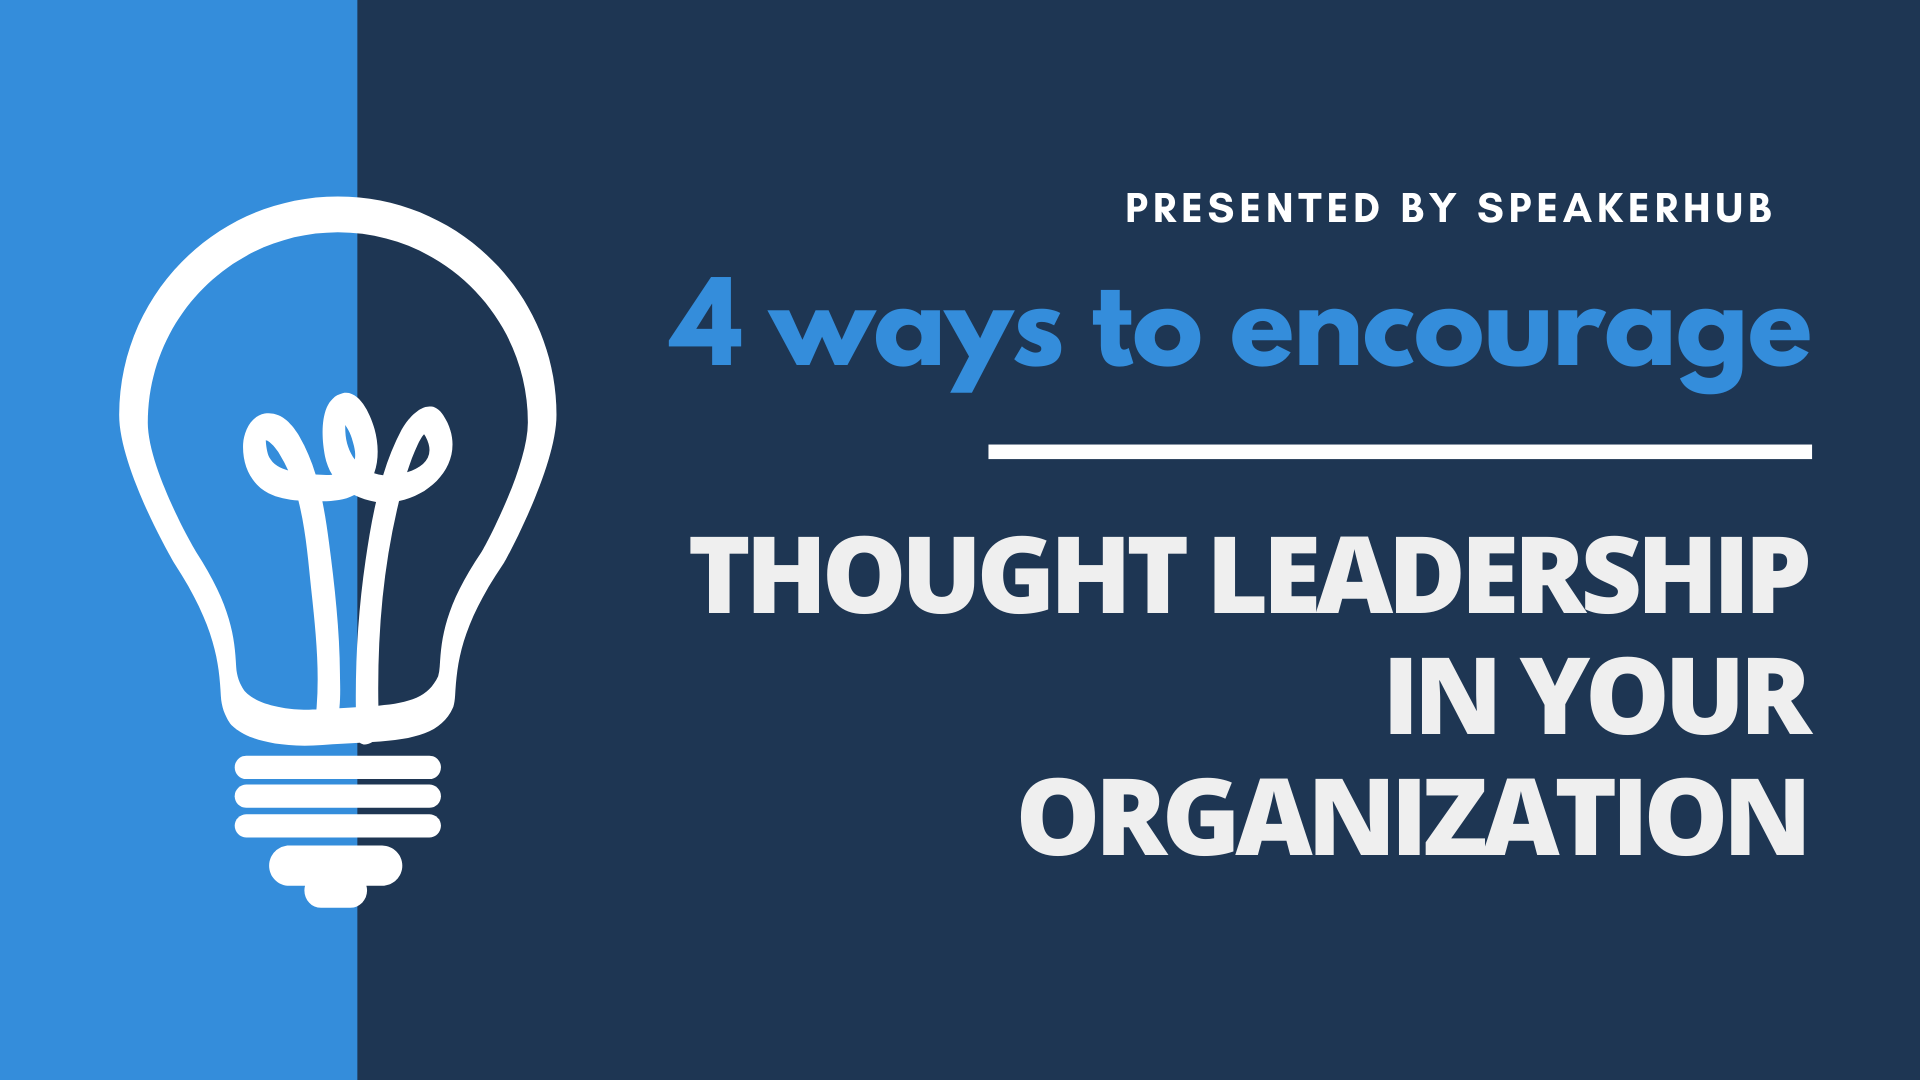 4 ways to encourage thought leadership in your organization